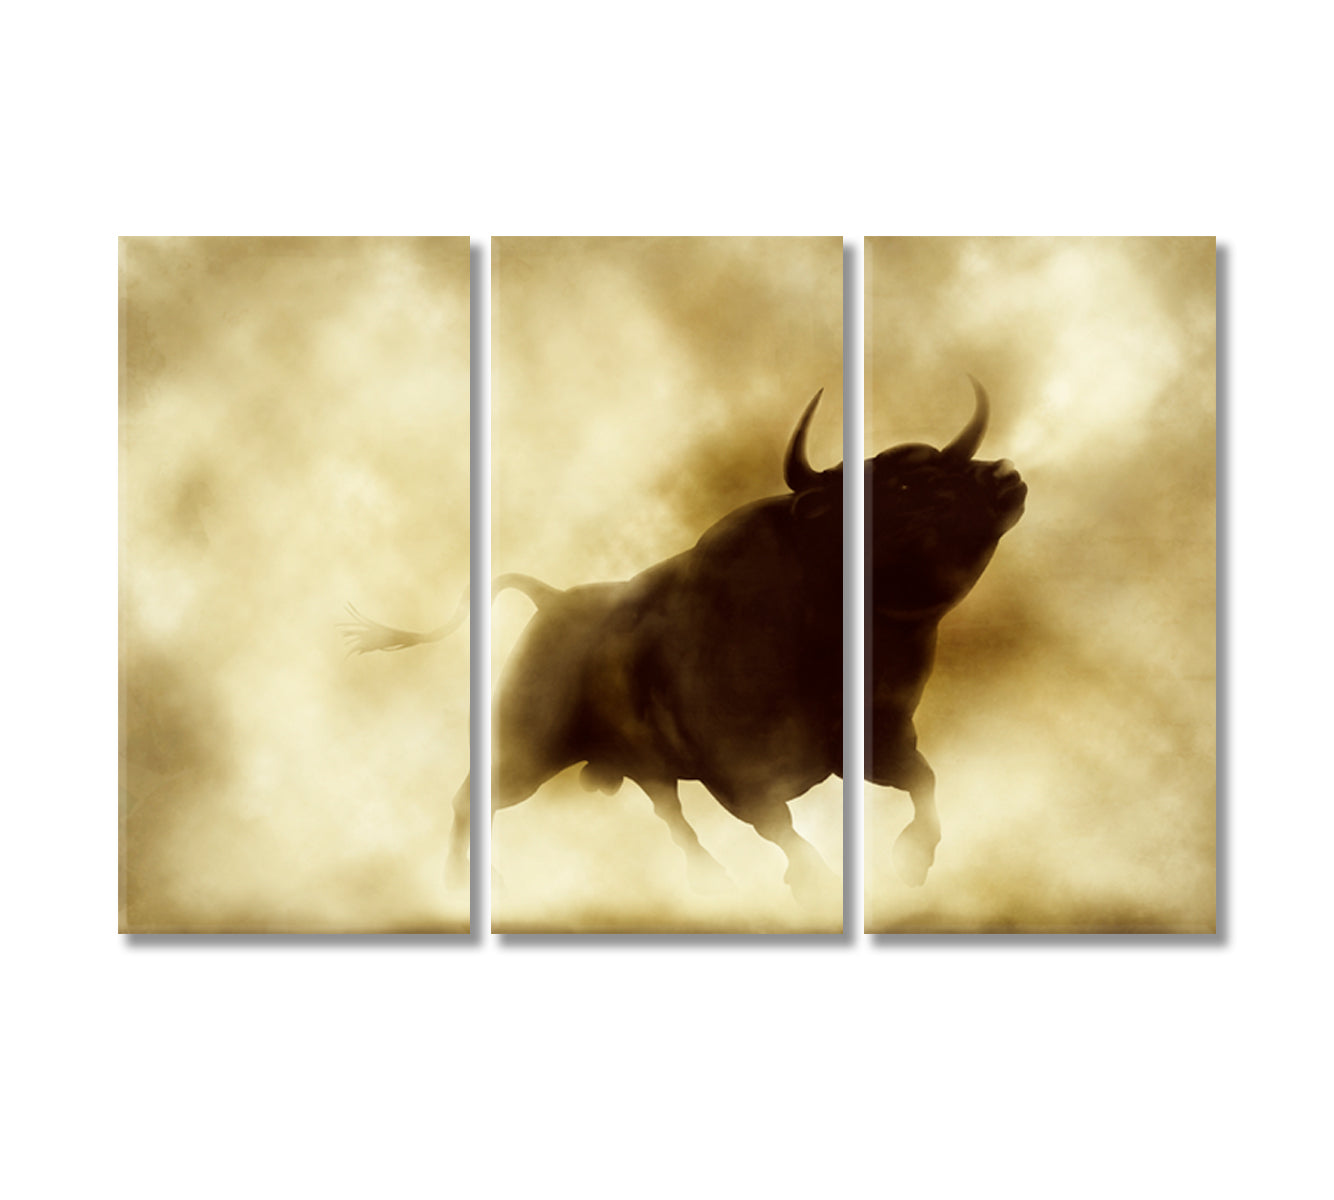 Angry Bull Silhouette in Smoke Canvas Print-Canvas Print-CetArt-3 Panels-36x24 inches-CetArt